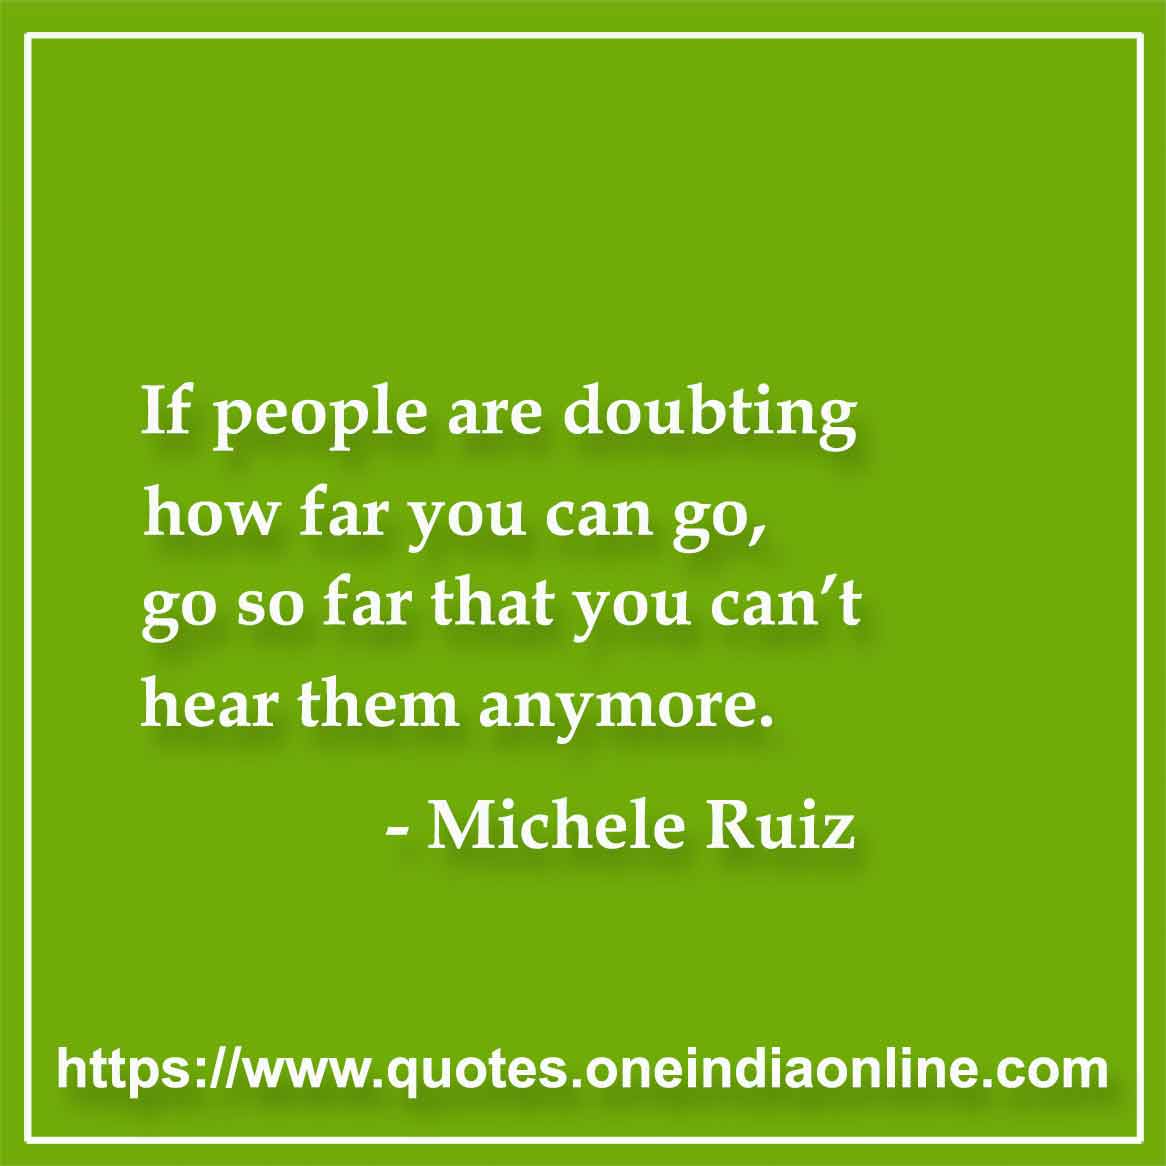 If people are doubting how far you can go, go so far that you can’t hear them anymore.

-  Michele Ruiz